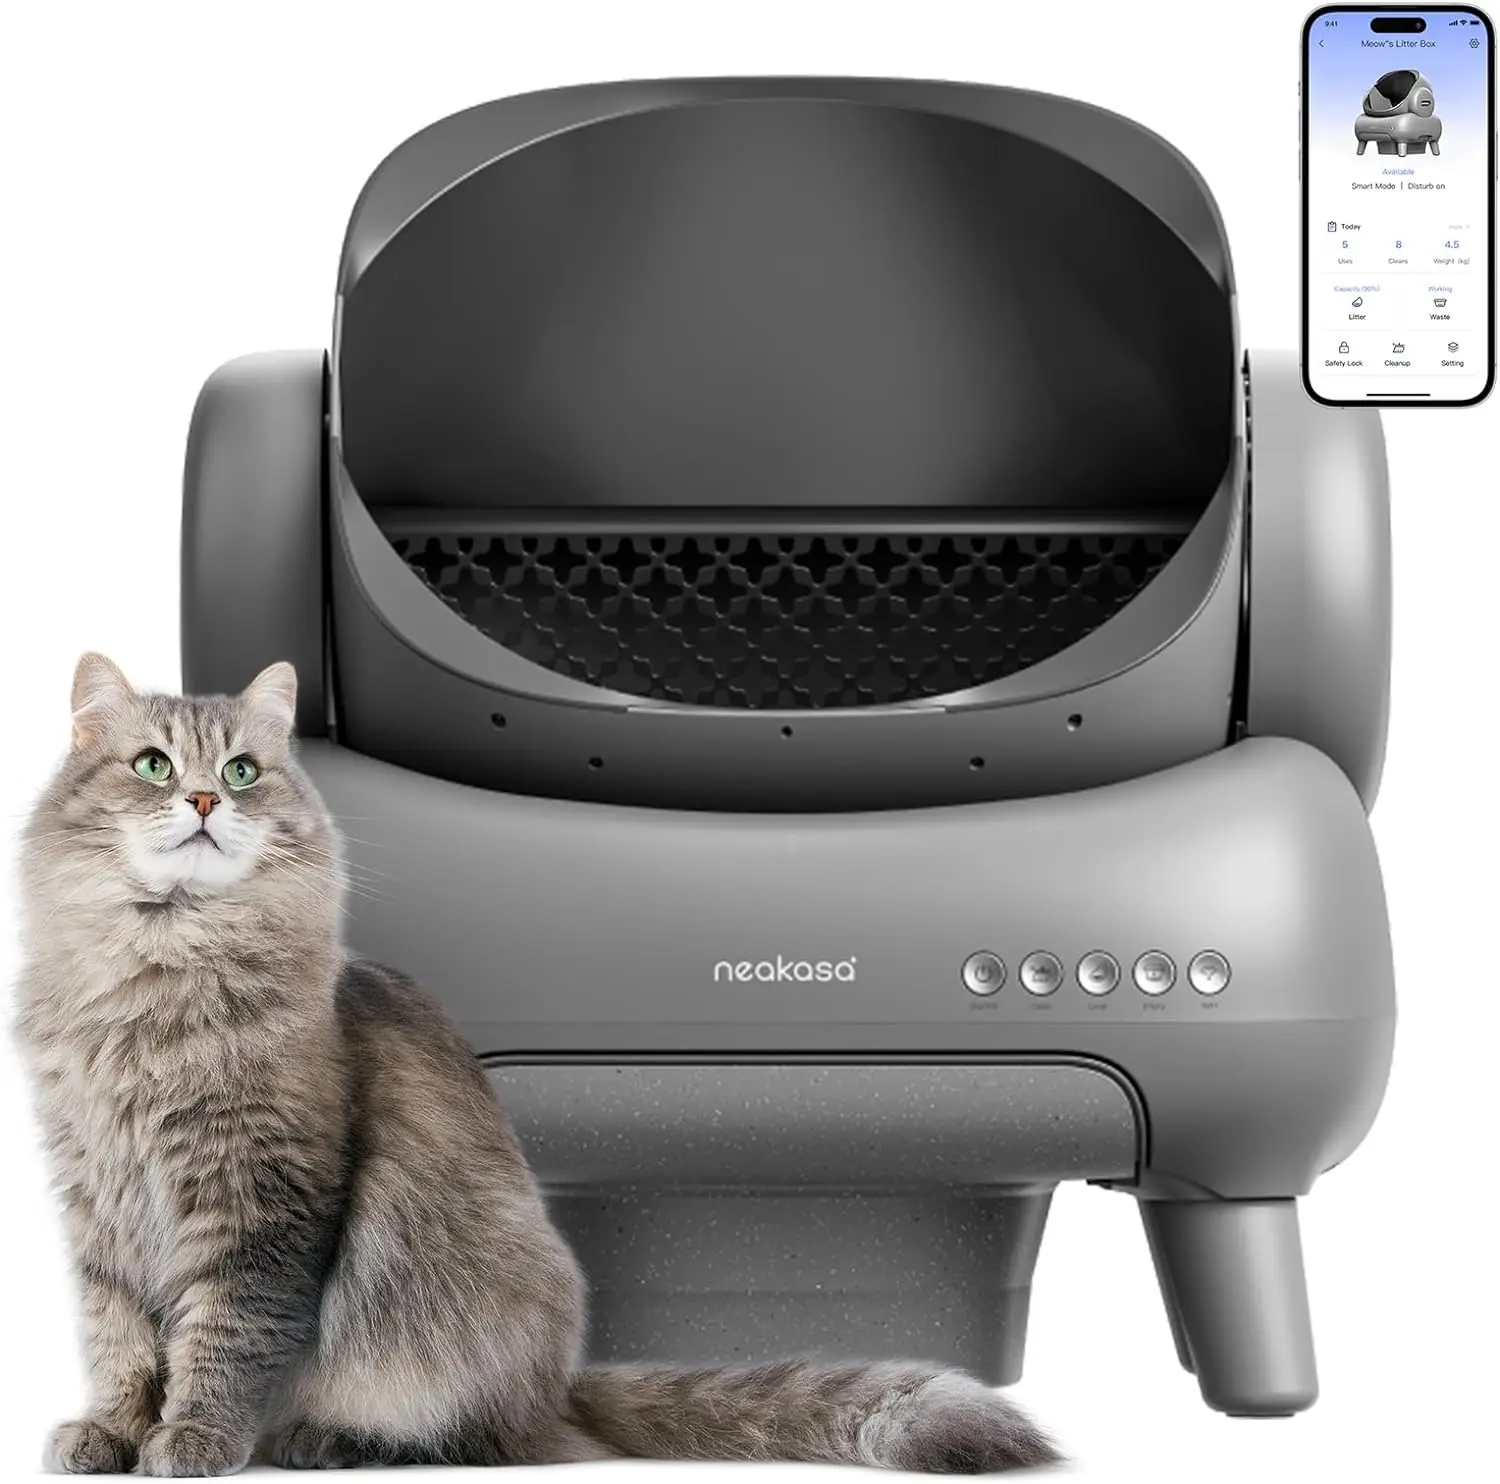 

Neakasa M1 Open-Top Self Cleaning Cat Litter Box,Automatic Cat Litter Box with APP Control,Odor-Free Waste Disposal Includes Tra